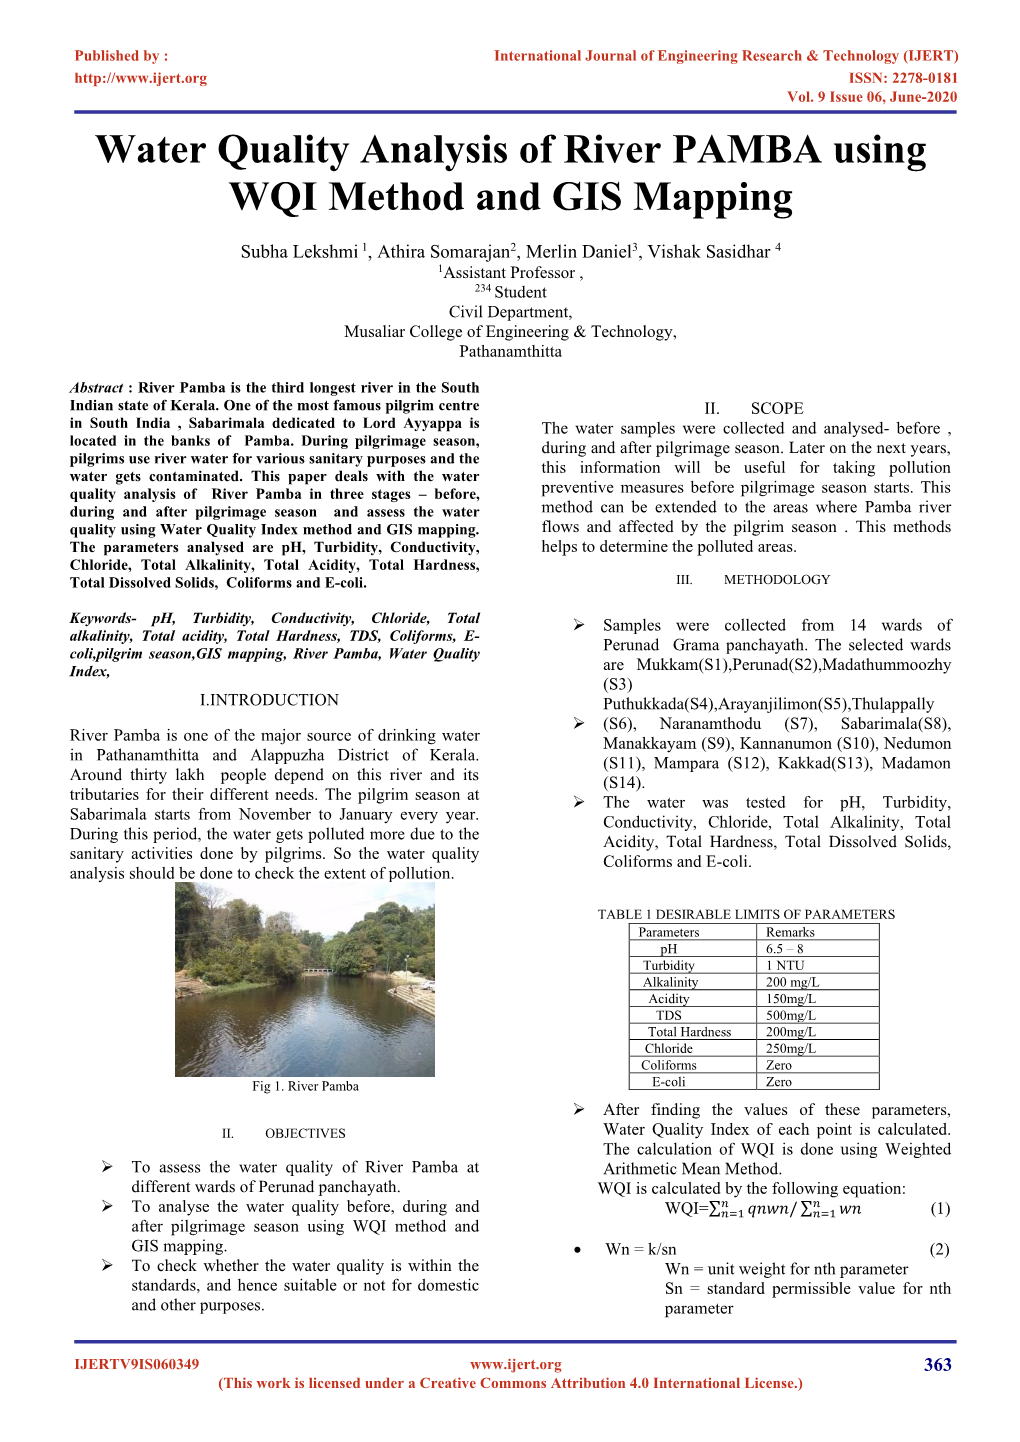 Water Quality Analysis of River PAMBA Using WQI Method and GIS Mapping